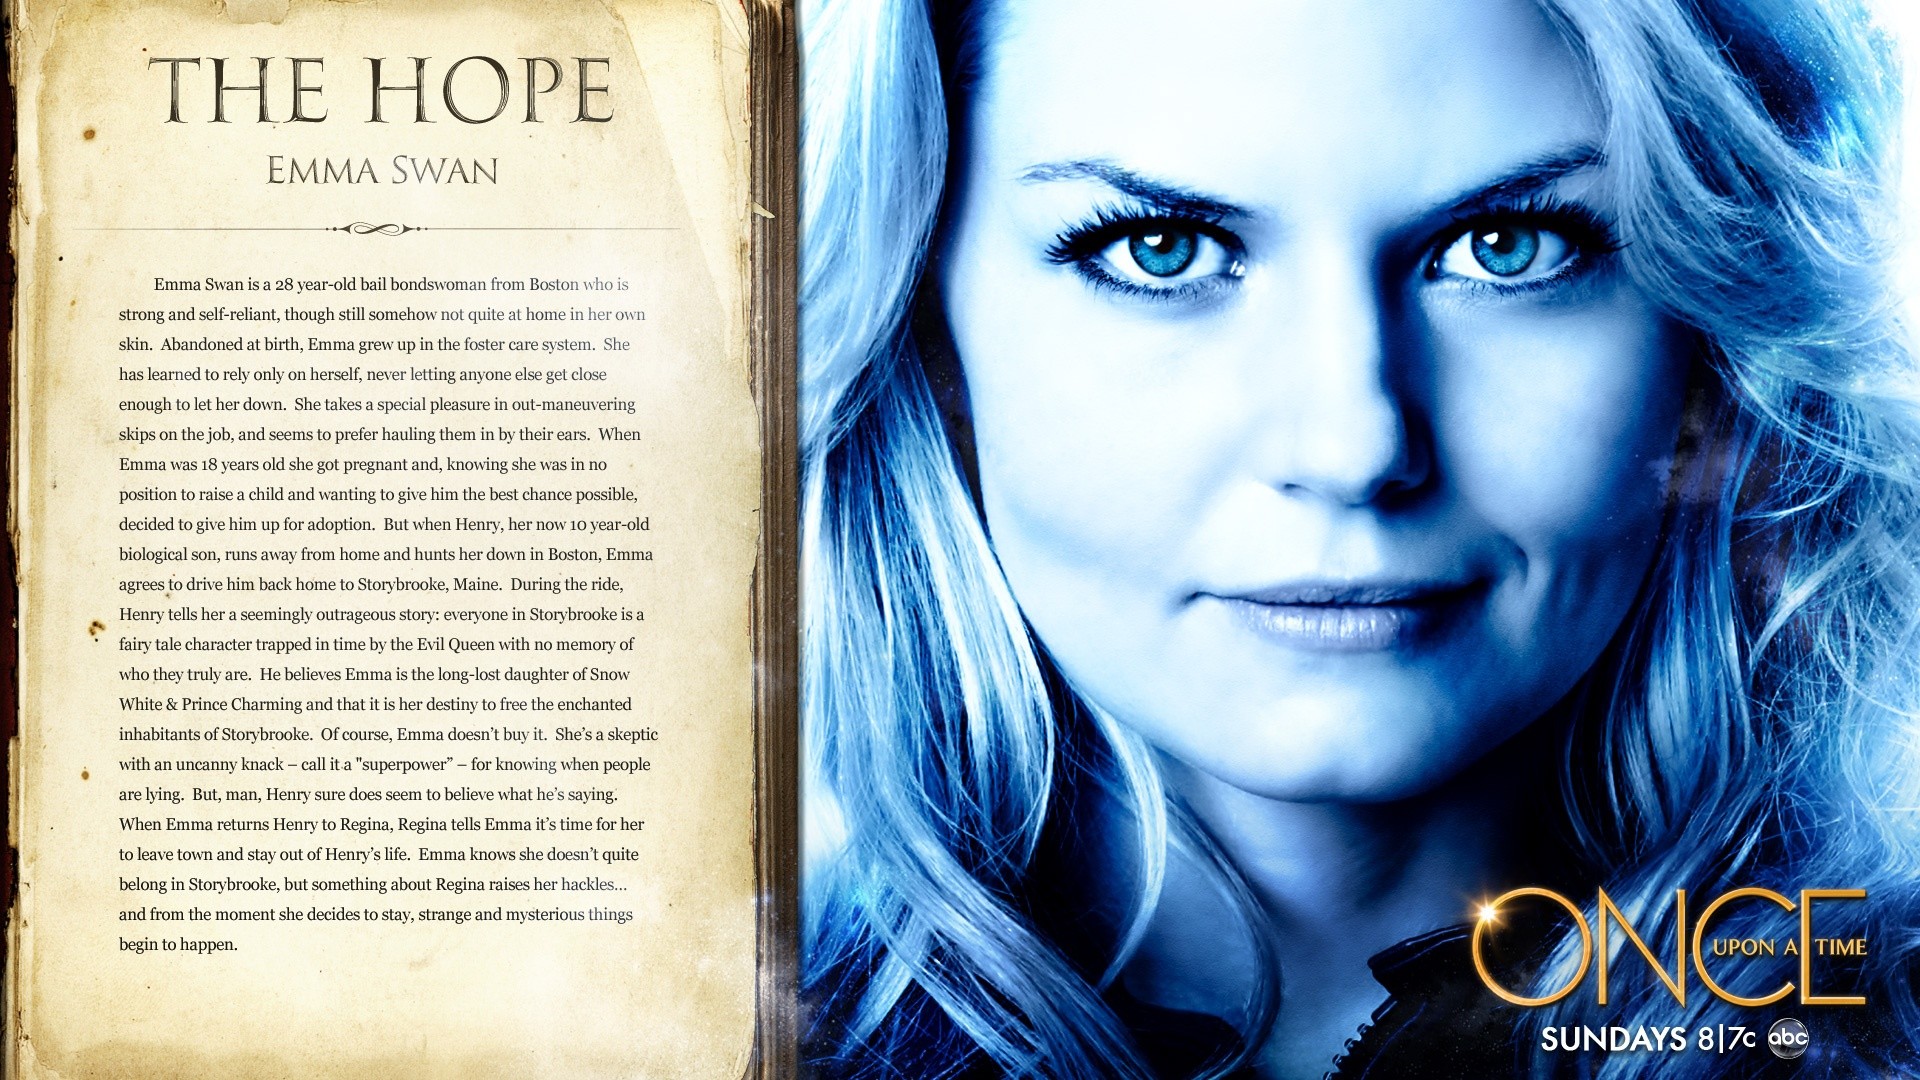 1920x1080 Others Once Upon A Time Season 1 Emma Swan The Hope Wallpaper  Once  Upon a